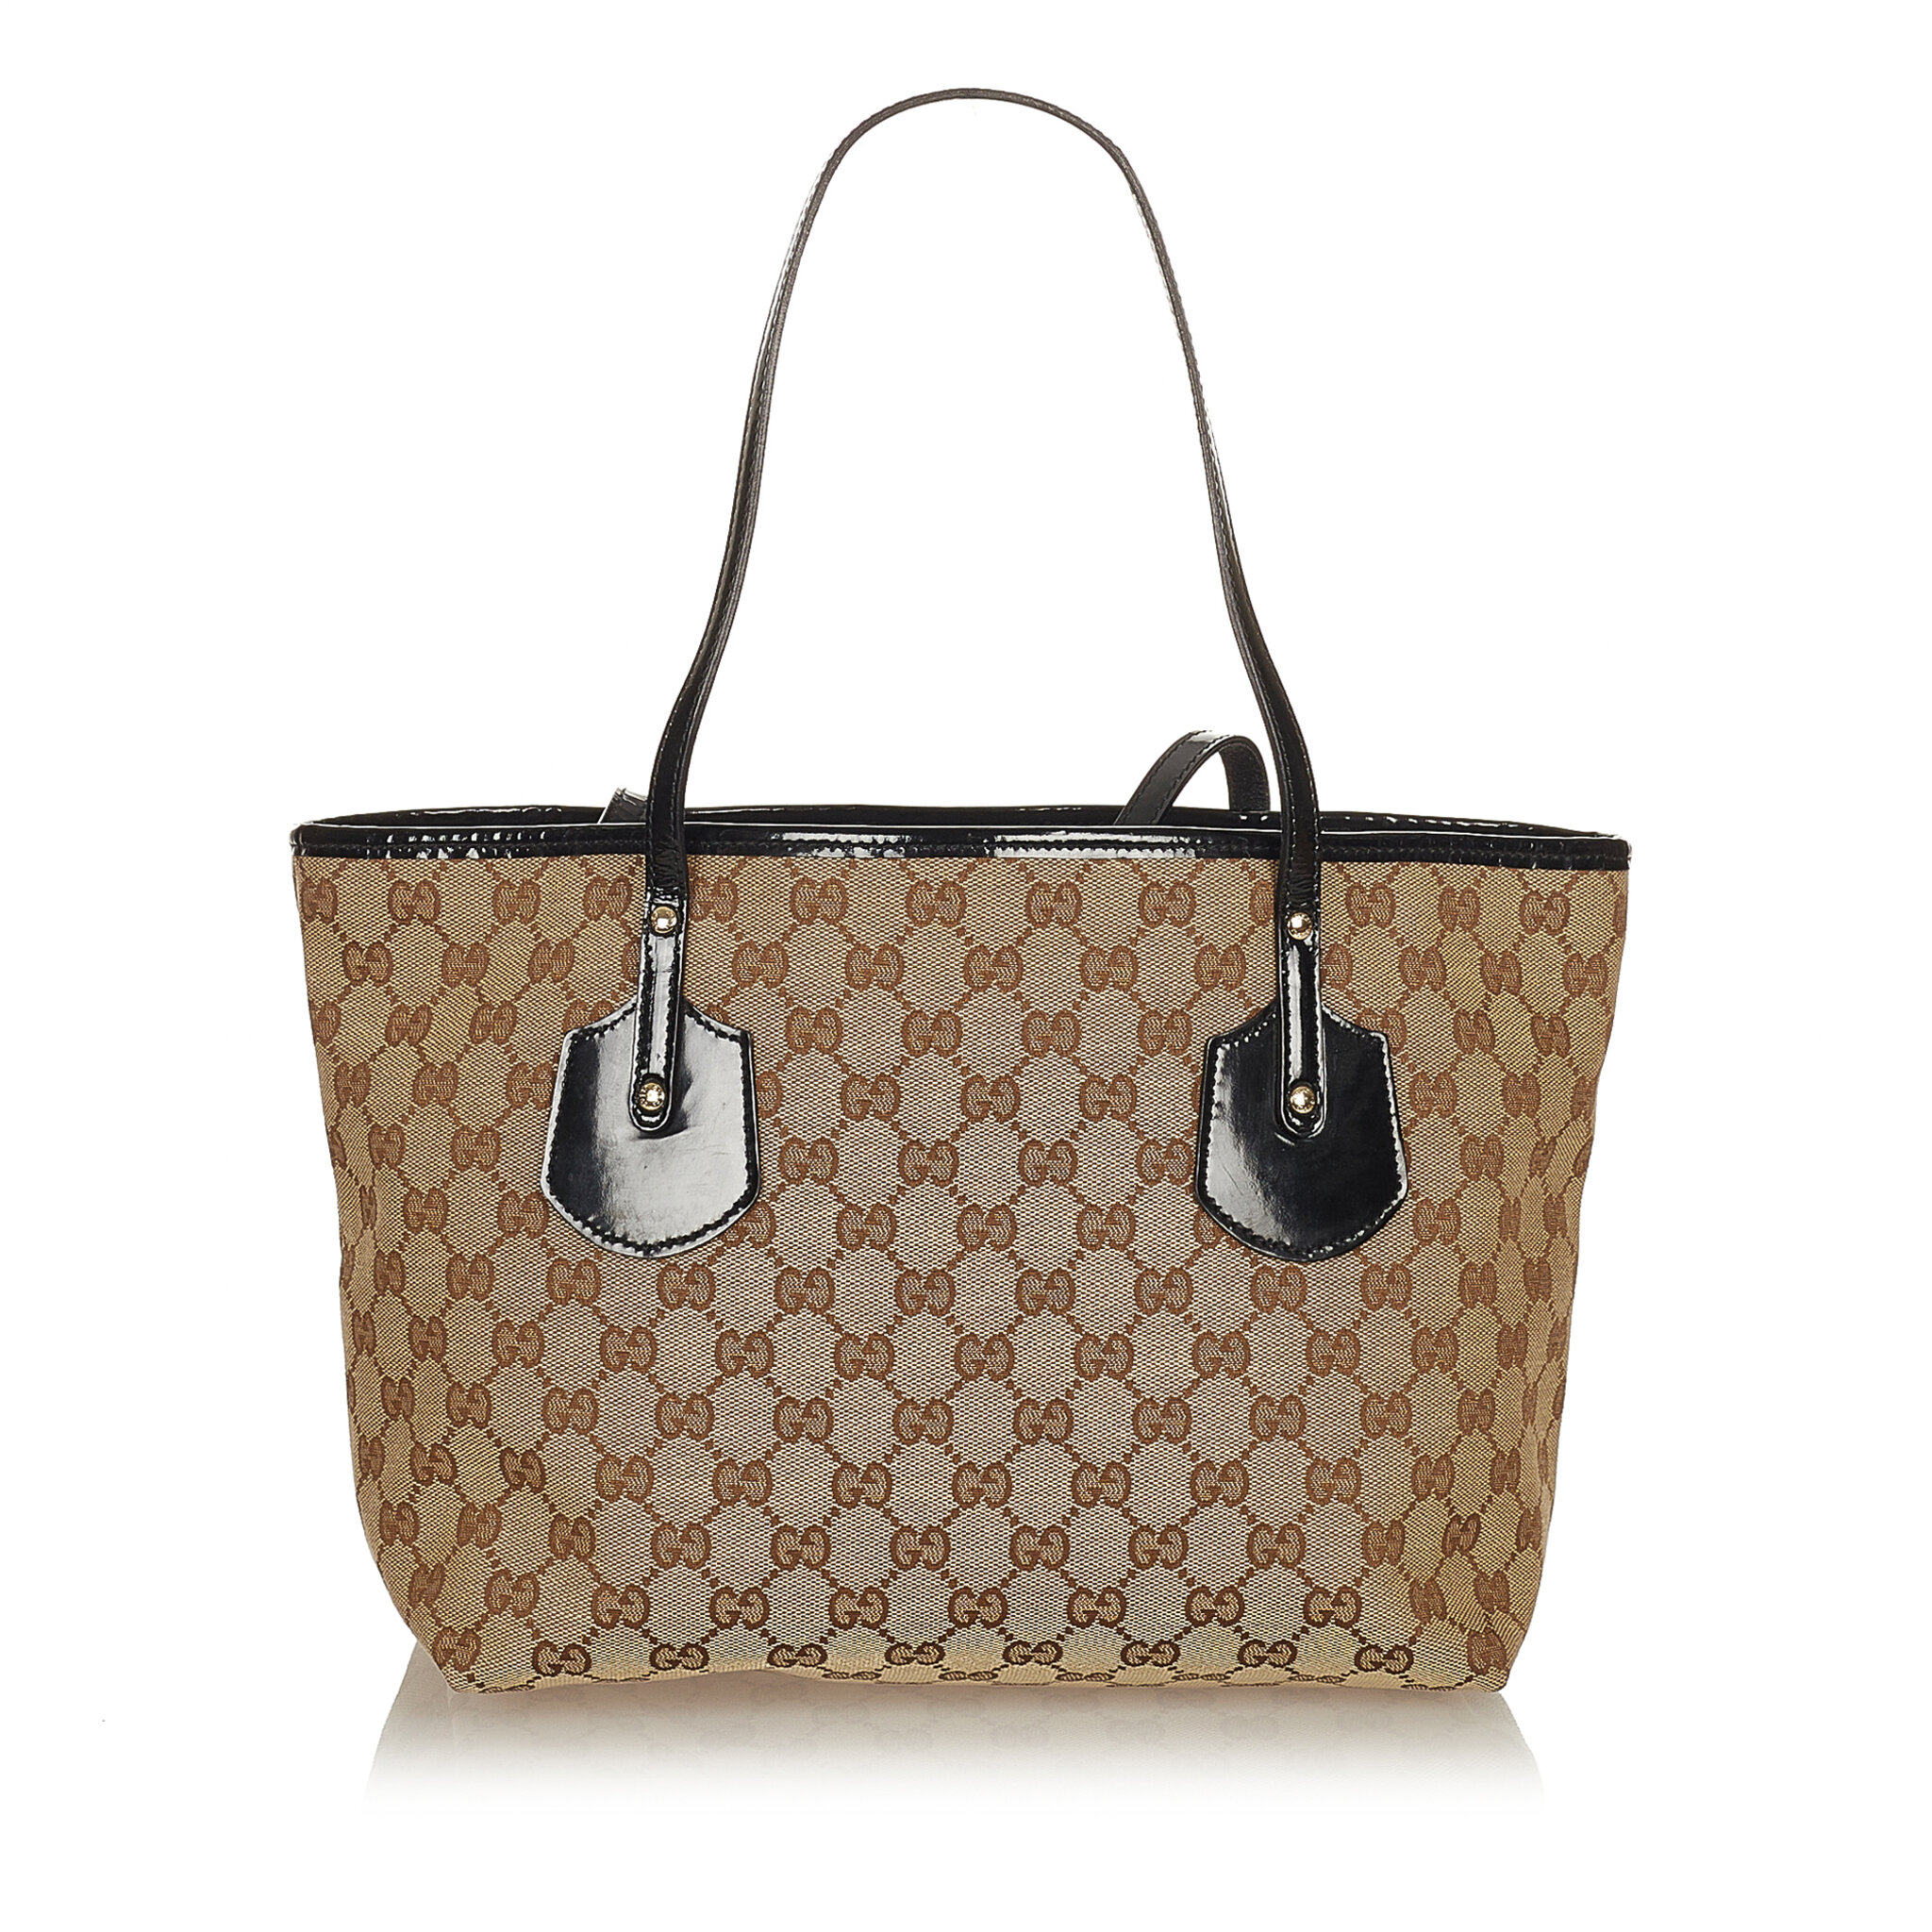 Gucci Gg Canvas Jolie Tote Bag, ONESIZE, beige